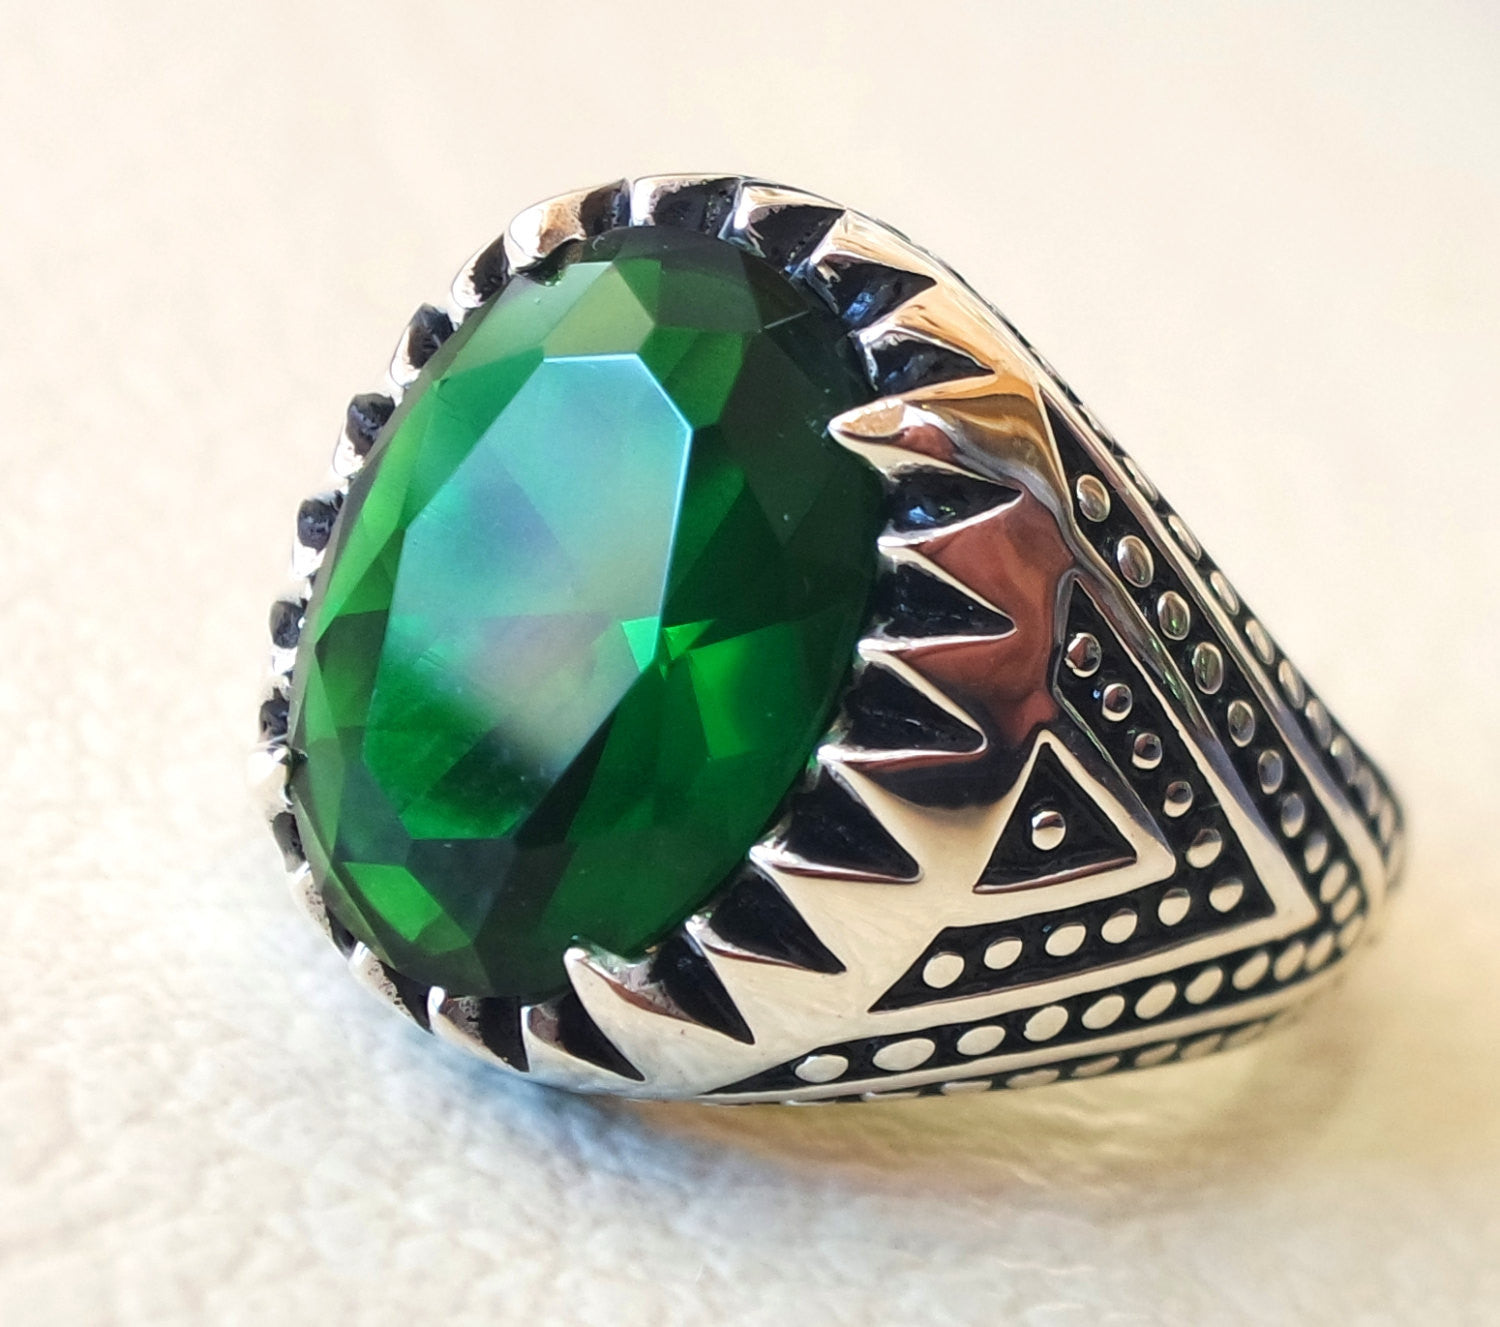 deep vivid fancy emerald green synthetic corundum oval stone high quality stone sterling silver 925 men ring all sizes jewelry